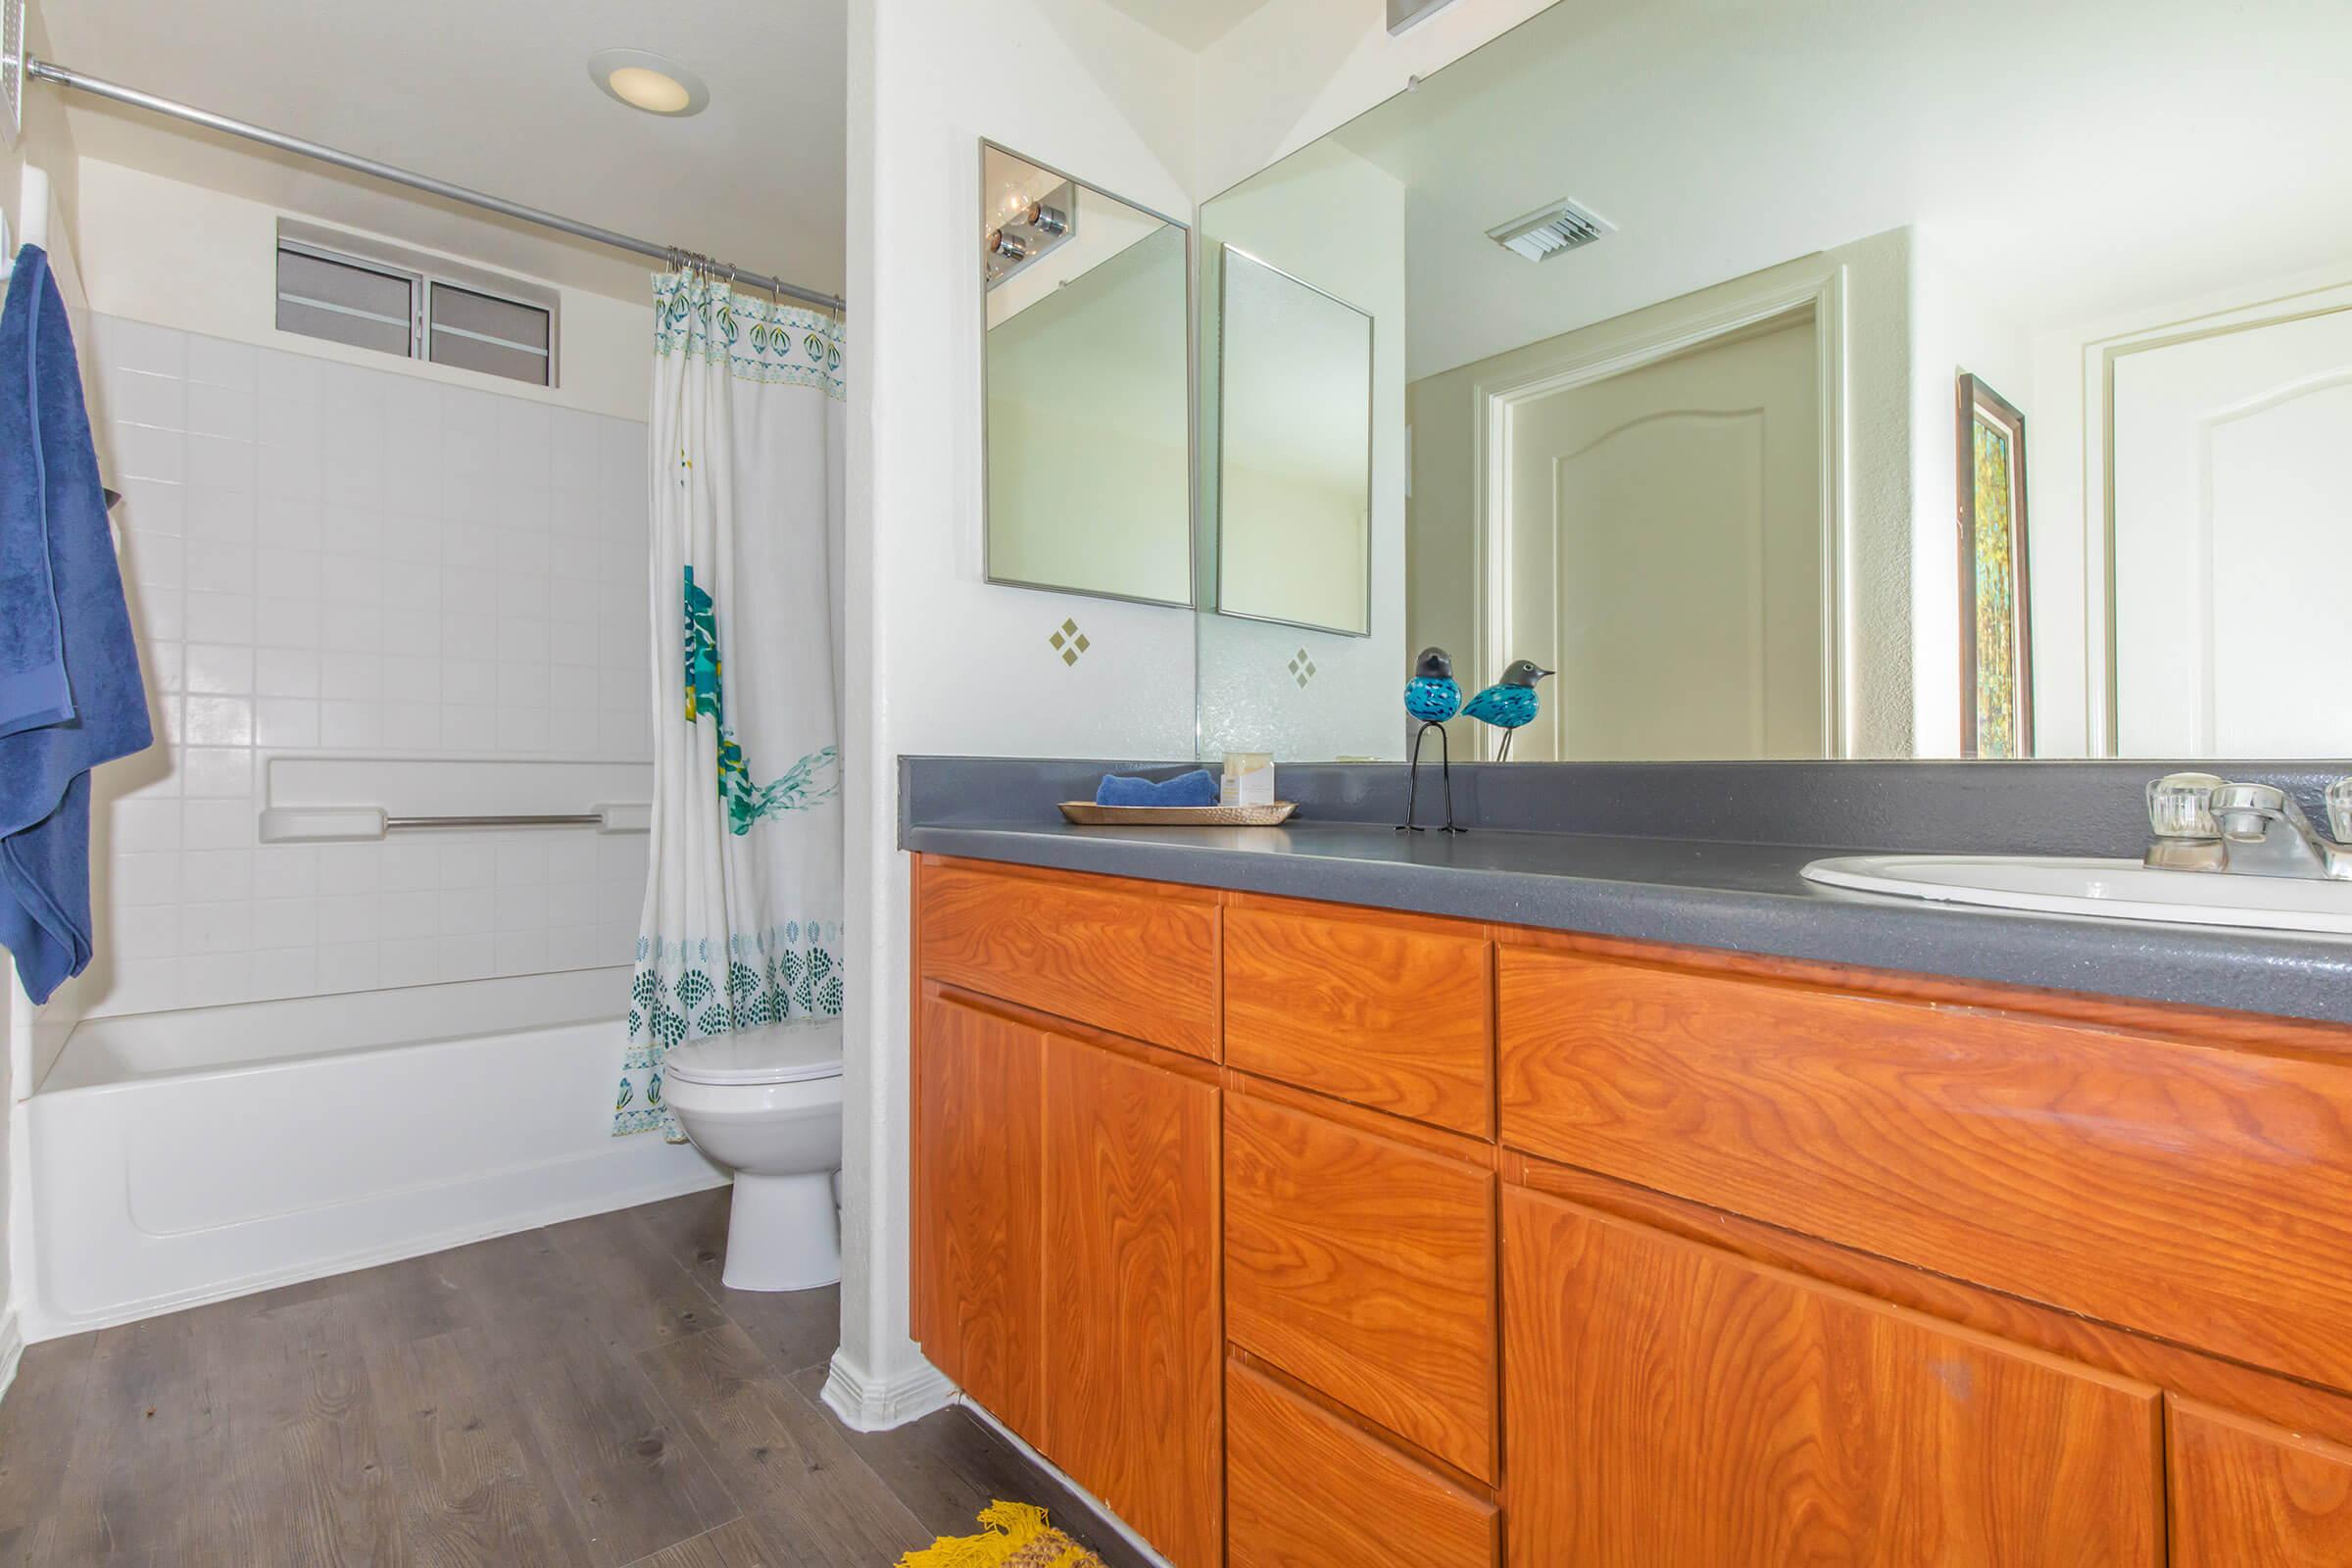 LARGE BATHROOMS WITH ROOMY COUNTERS AND CABINETS